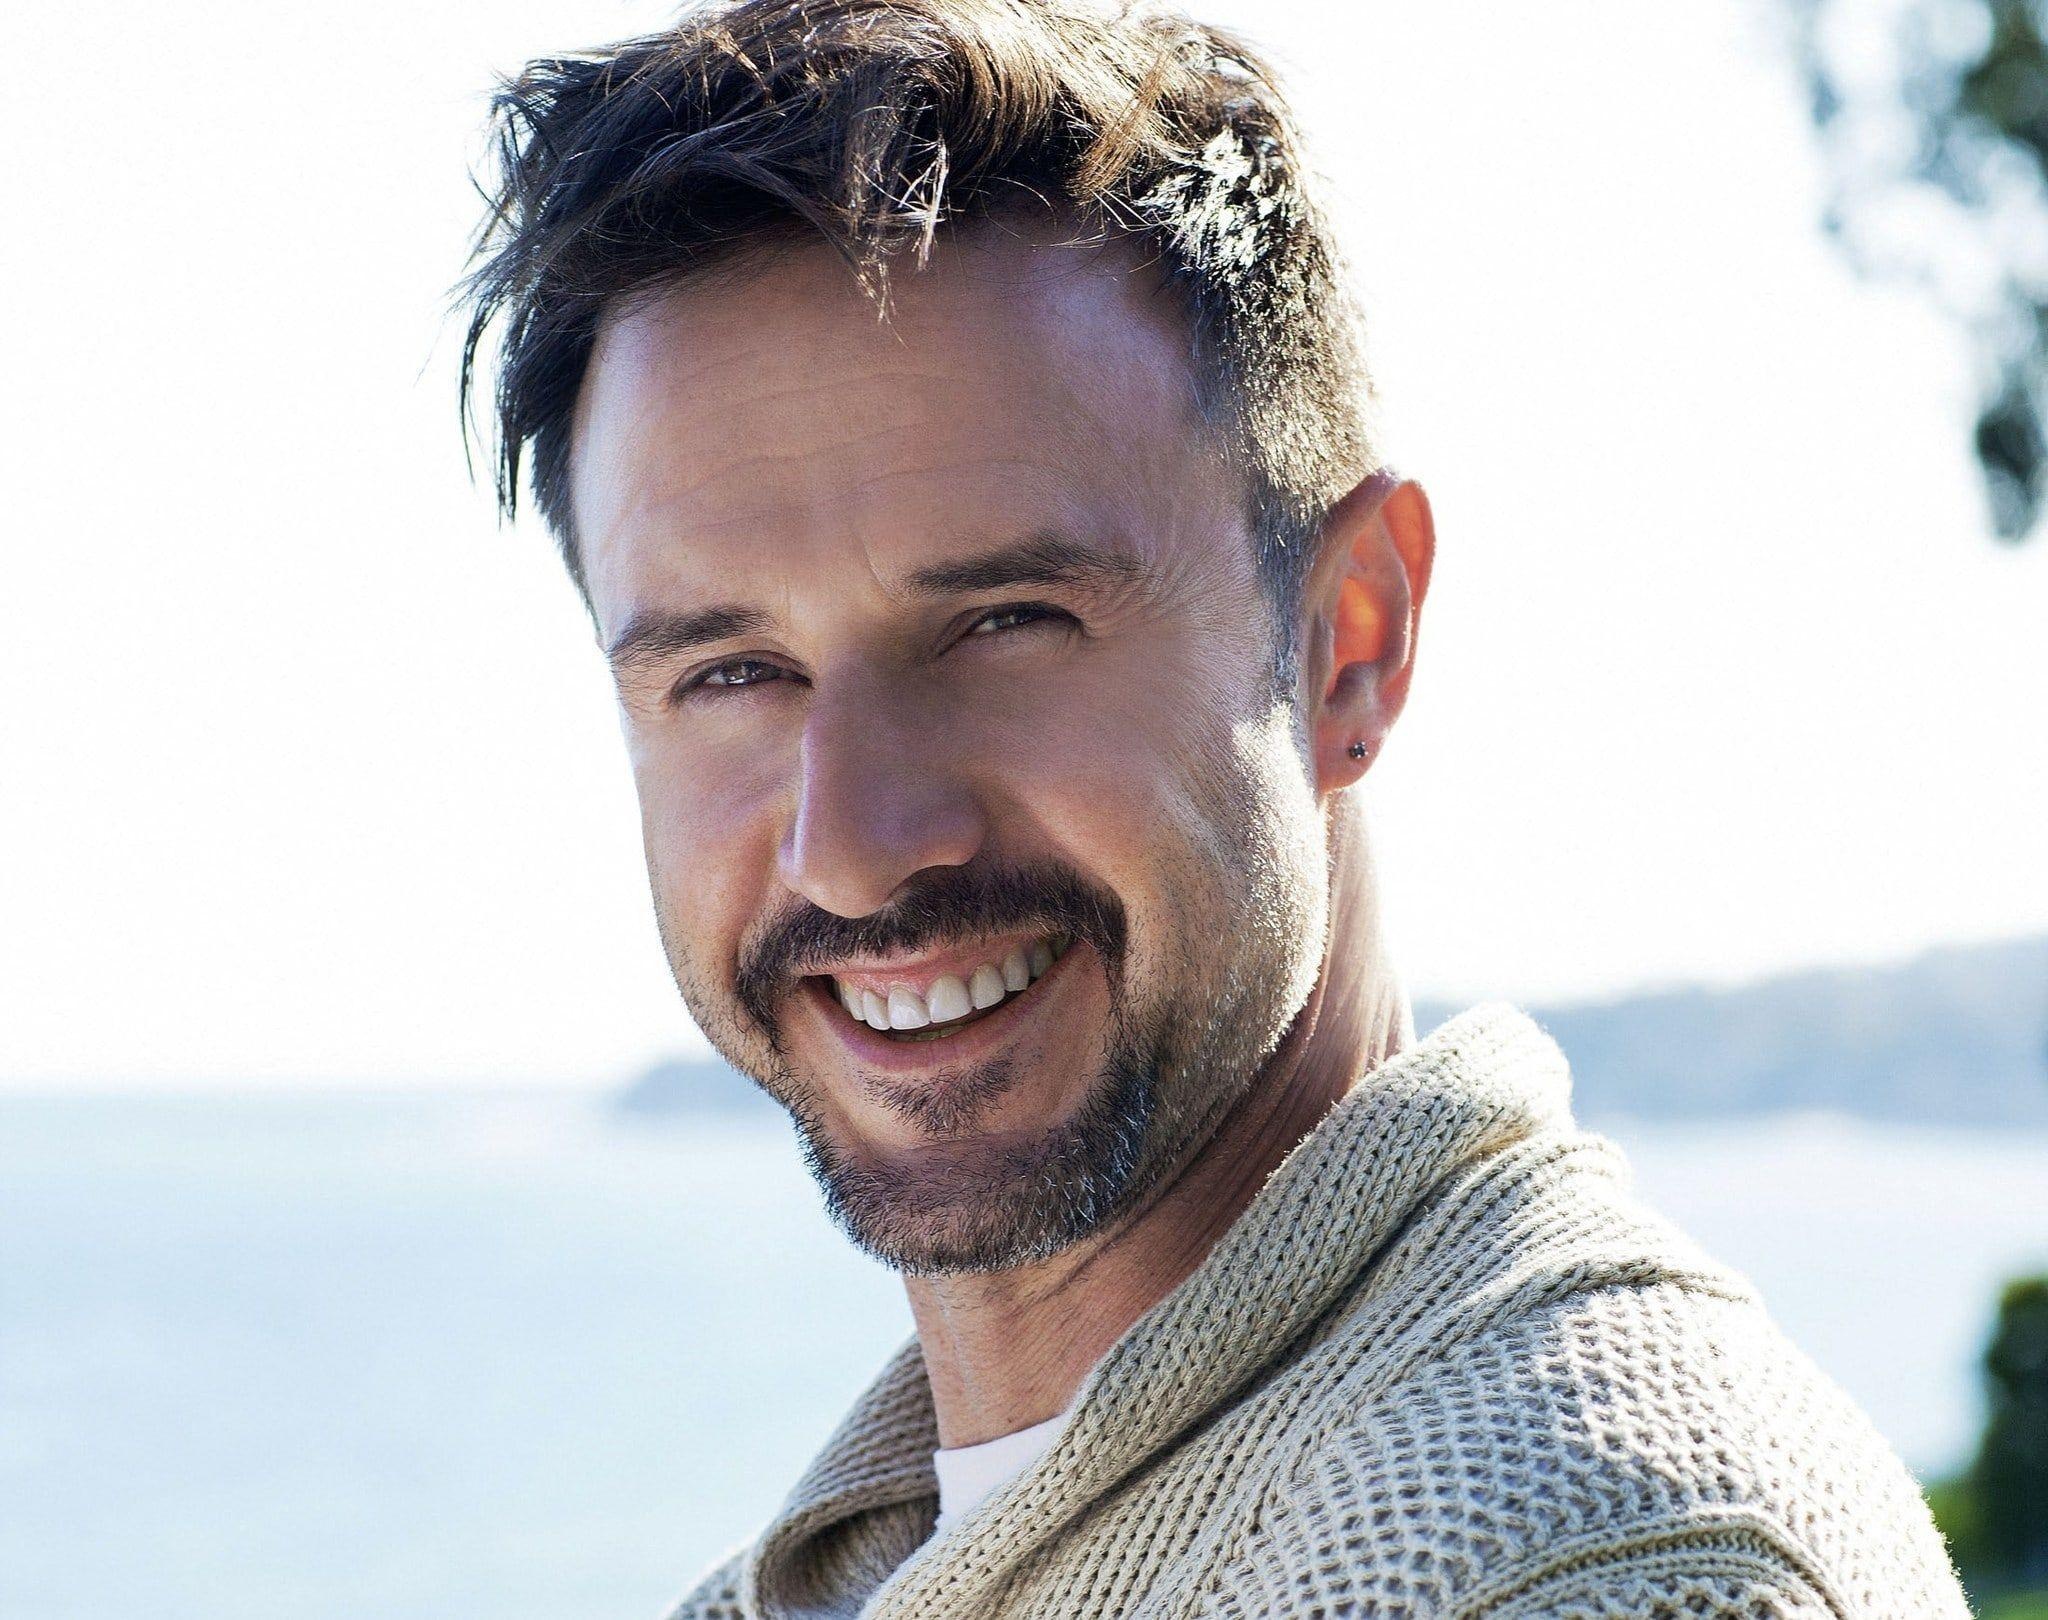 David Arquette: Appeared alongside his sister in the TV show Medium in January 2011 as Michael "Lucky" Benoit. 2050x1620 HD Background.